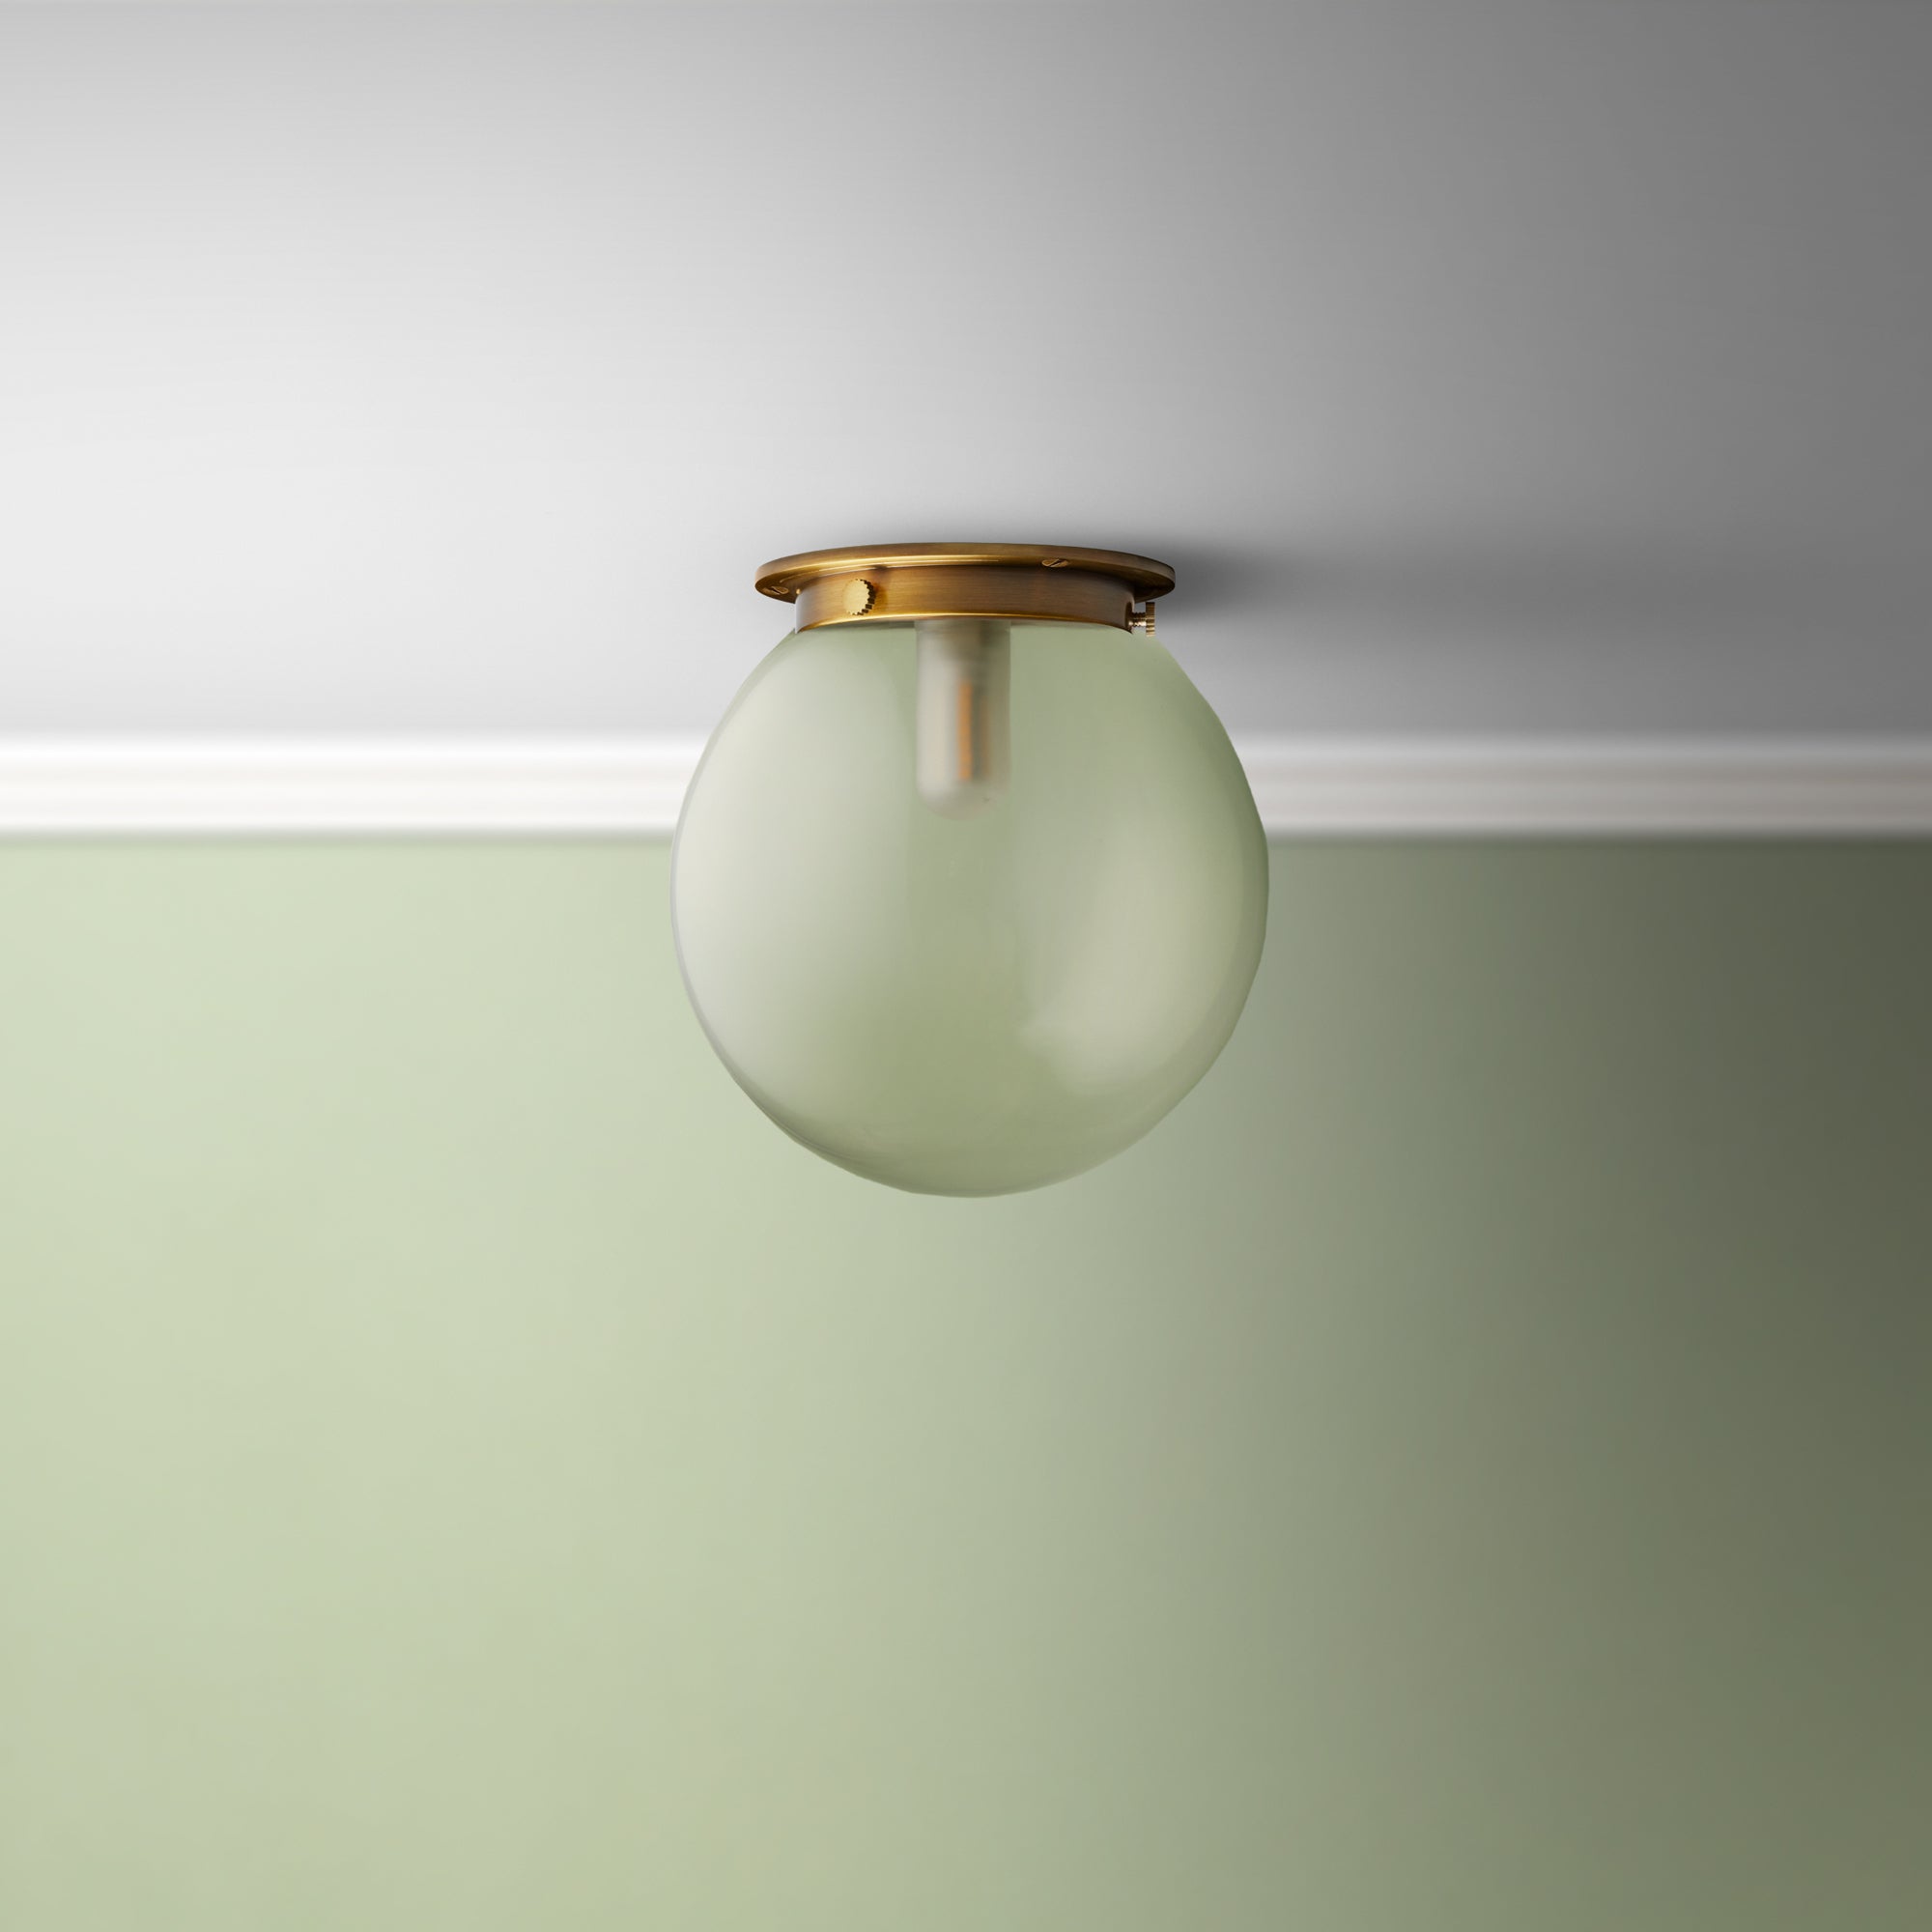 smaller plumb wall fitting in antiqued brass with smaller espere in clear glass